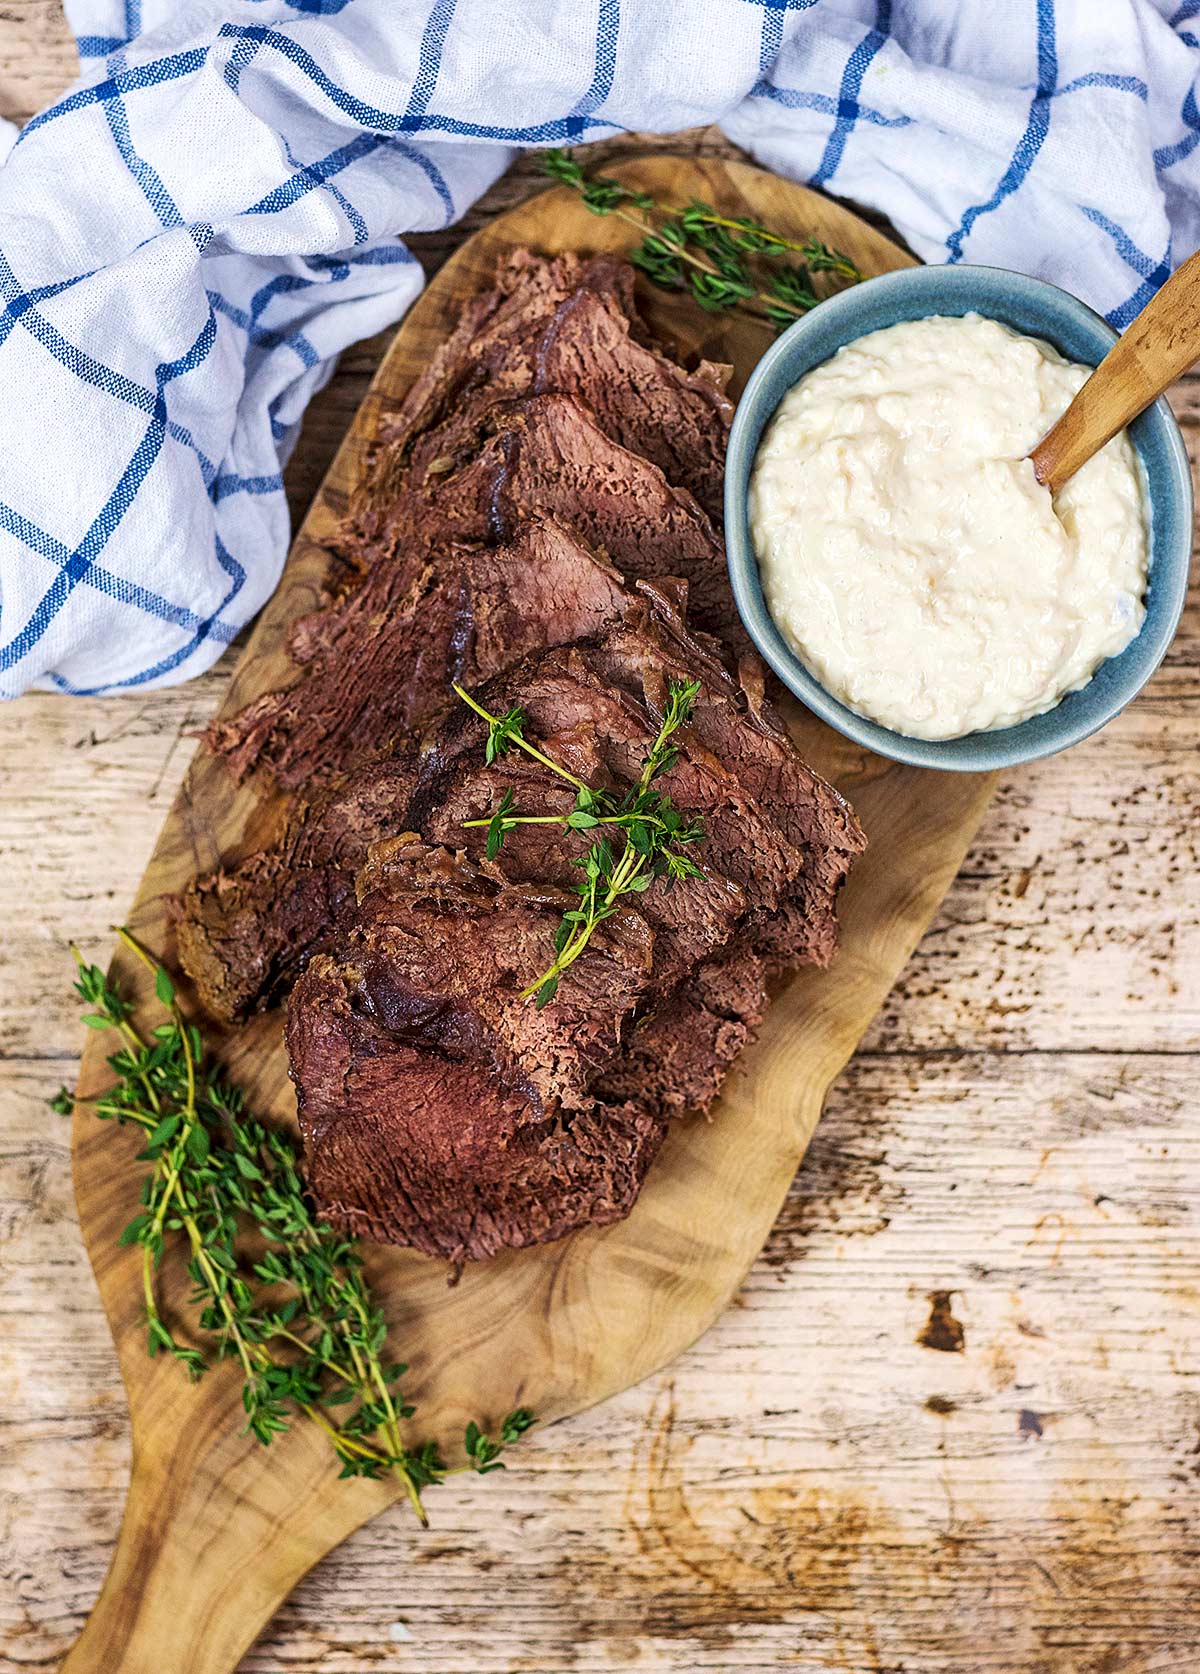 Slices of roast beef on a wooden serving board with a bowl of horseradish sauce.